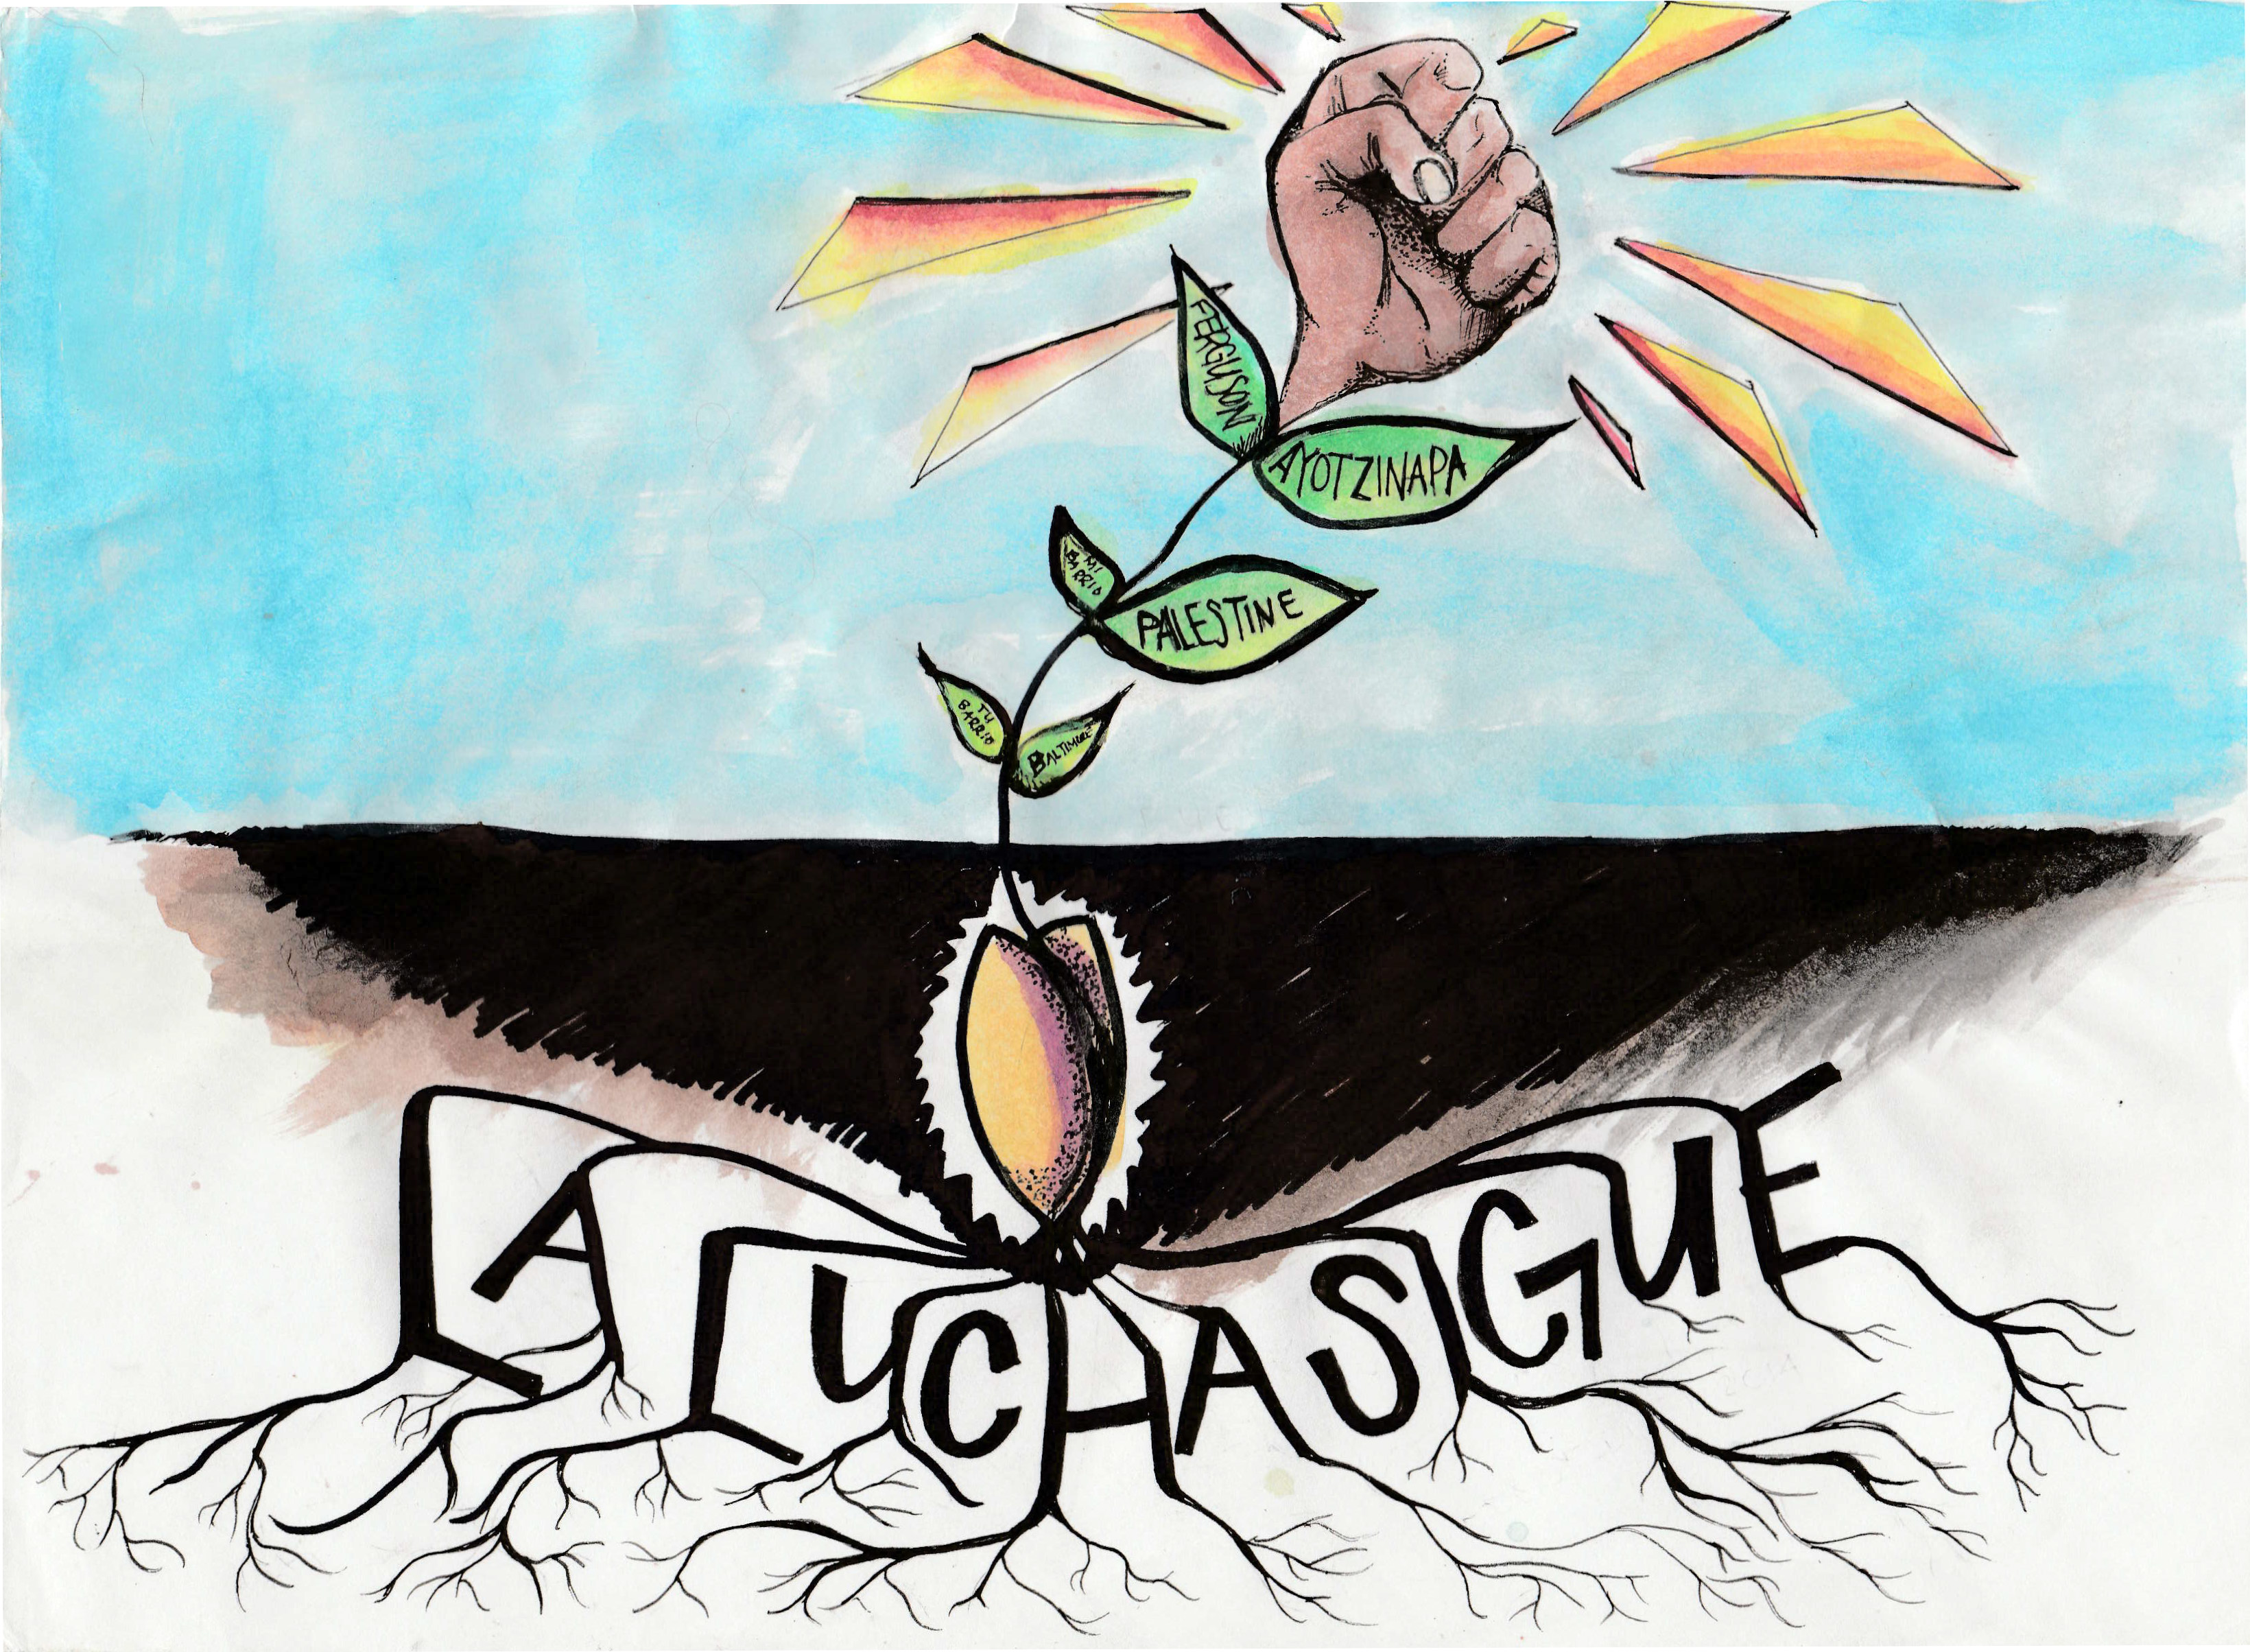 Justseeds  La Lucha Sigue (The Struggle Continues)